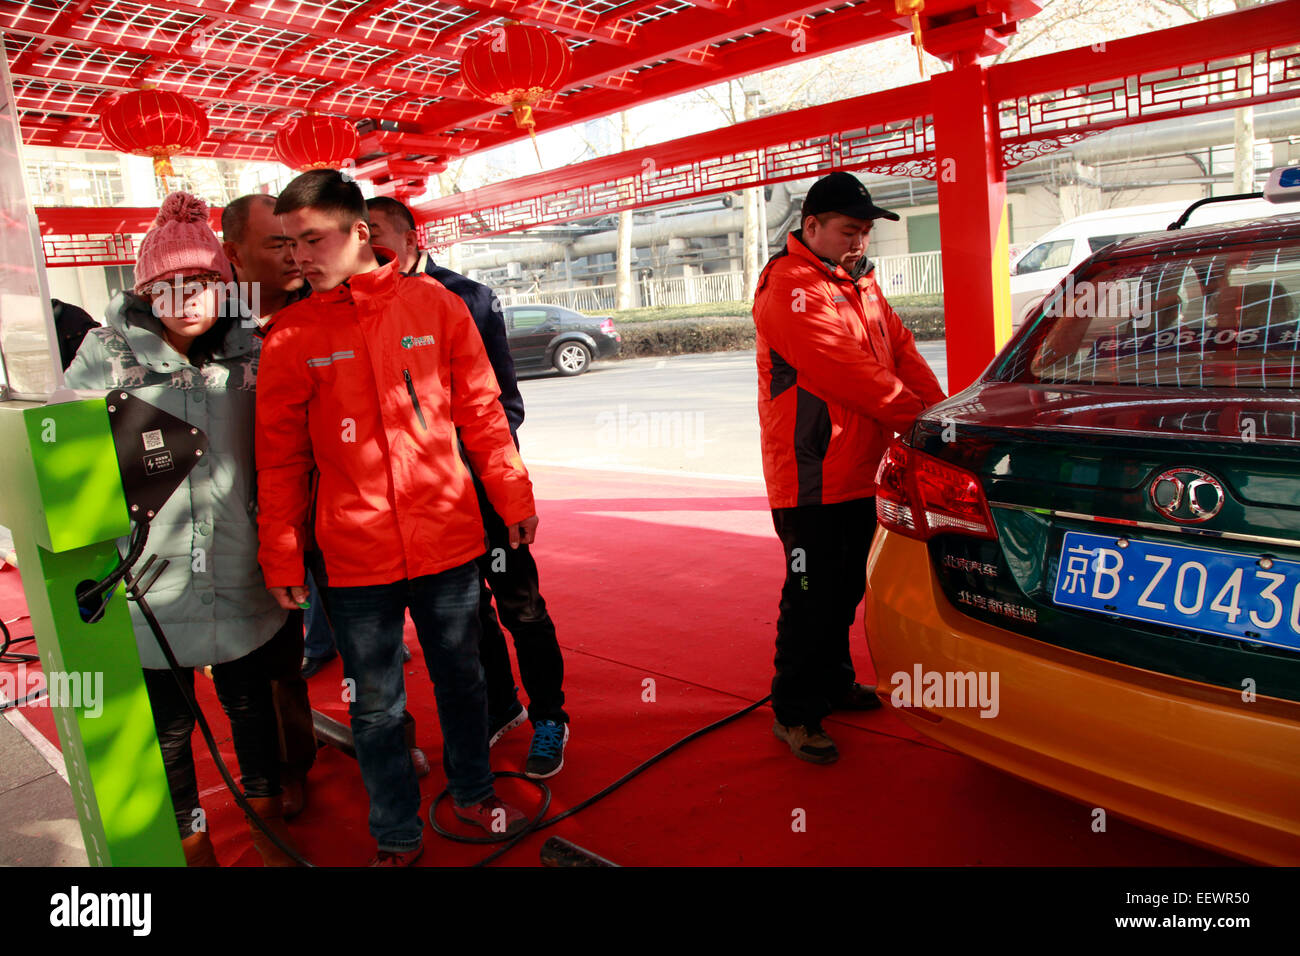 Beijing, China. 22nd Jan, 2015. A staff (R) recharges an electric taxi at a new photovoltaic power station in Beijing, capital of China, Jan. 22, 2015. Beijing's first photovoltaic power station for electric vehicles has been launched recently in the city's central business district (CBD). In 2015, Beijing plans to add 100 more photovoltaic power stations with 3,500 charging units to cover the power needs of its electric vehicles. © Pan Xu/Xinhua/Alamy Live News Stock Photo